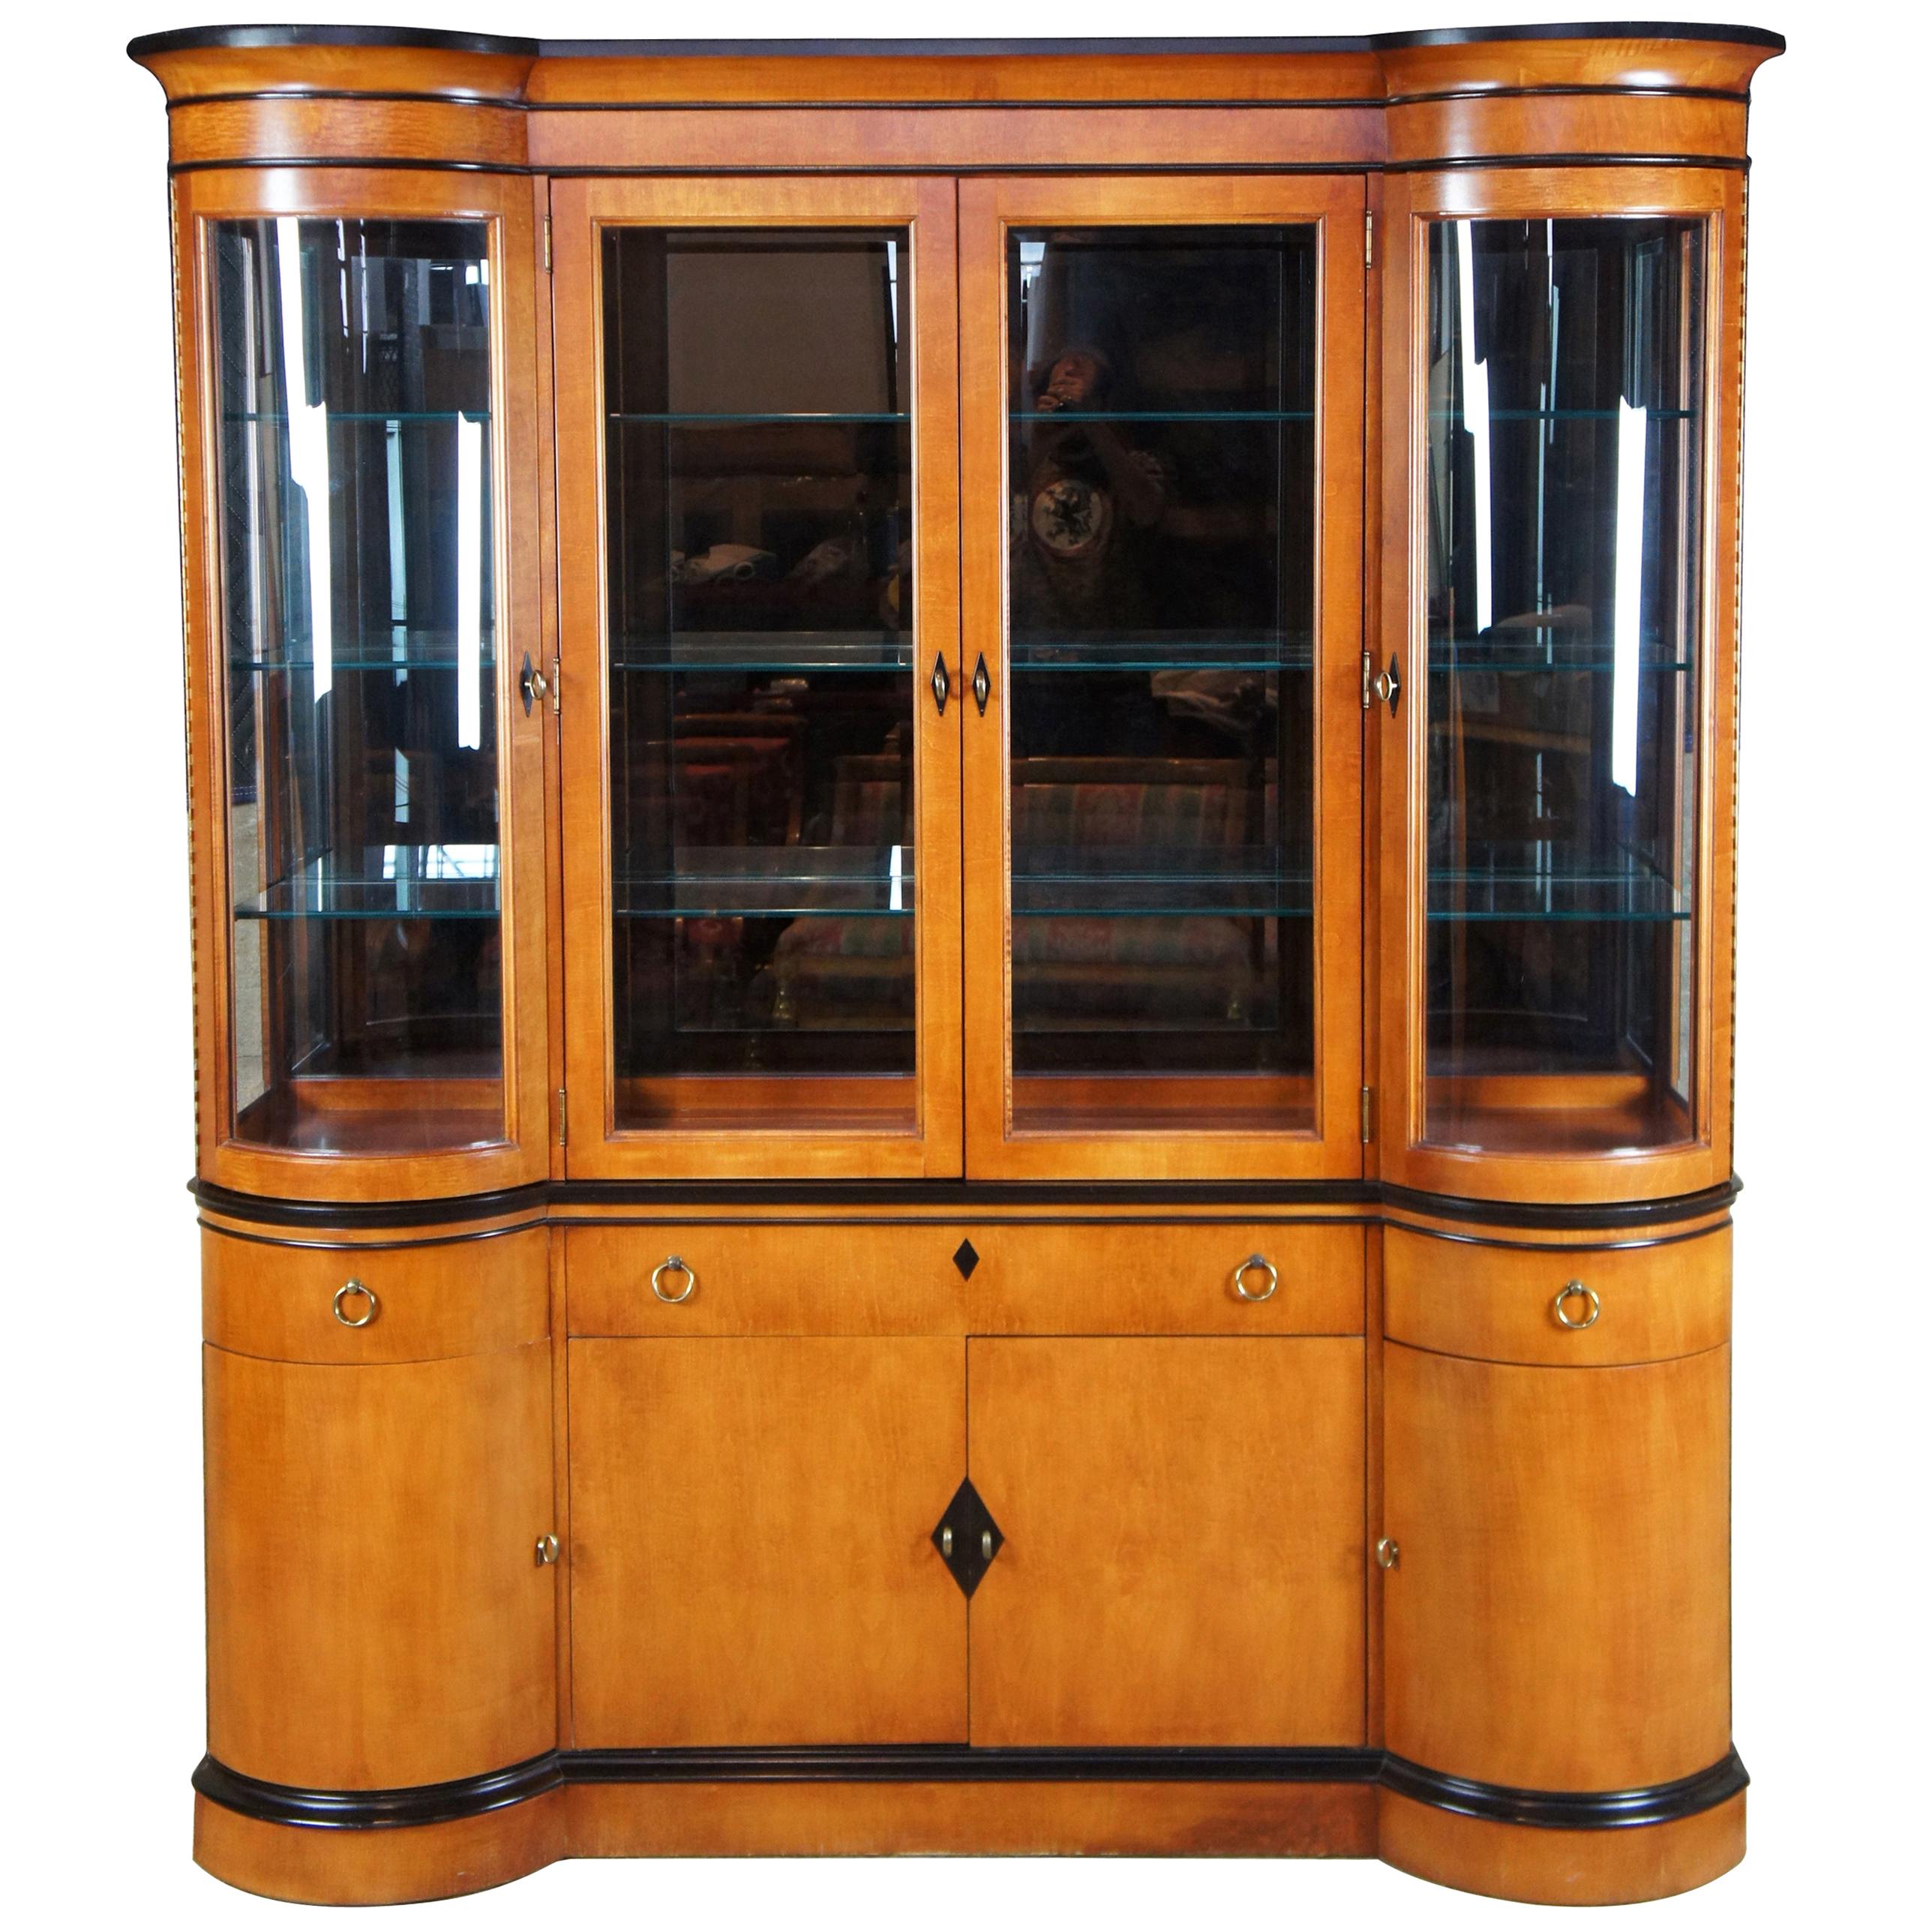 National Mt. Airy Maple Biedermeier Style Curved Glass Breakfront China Cabinet